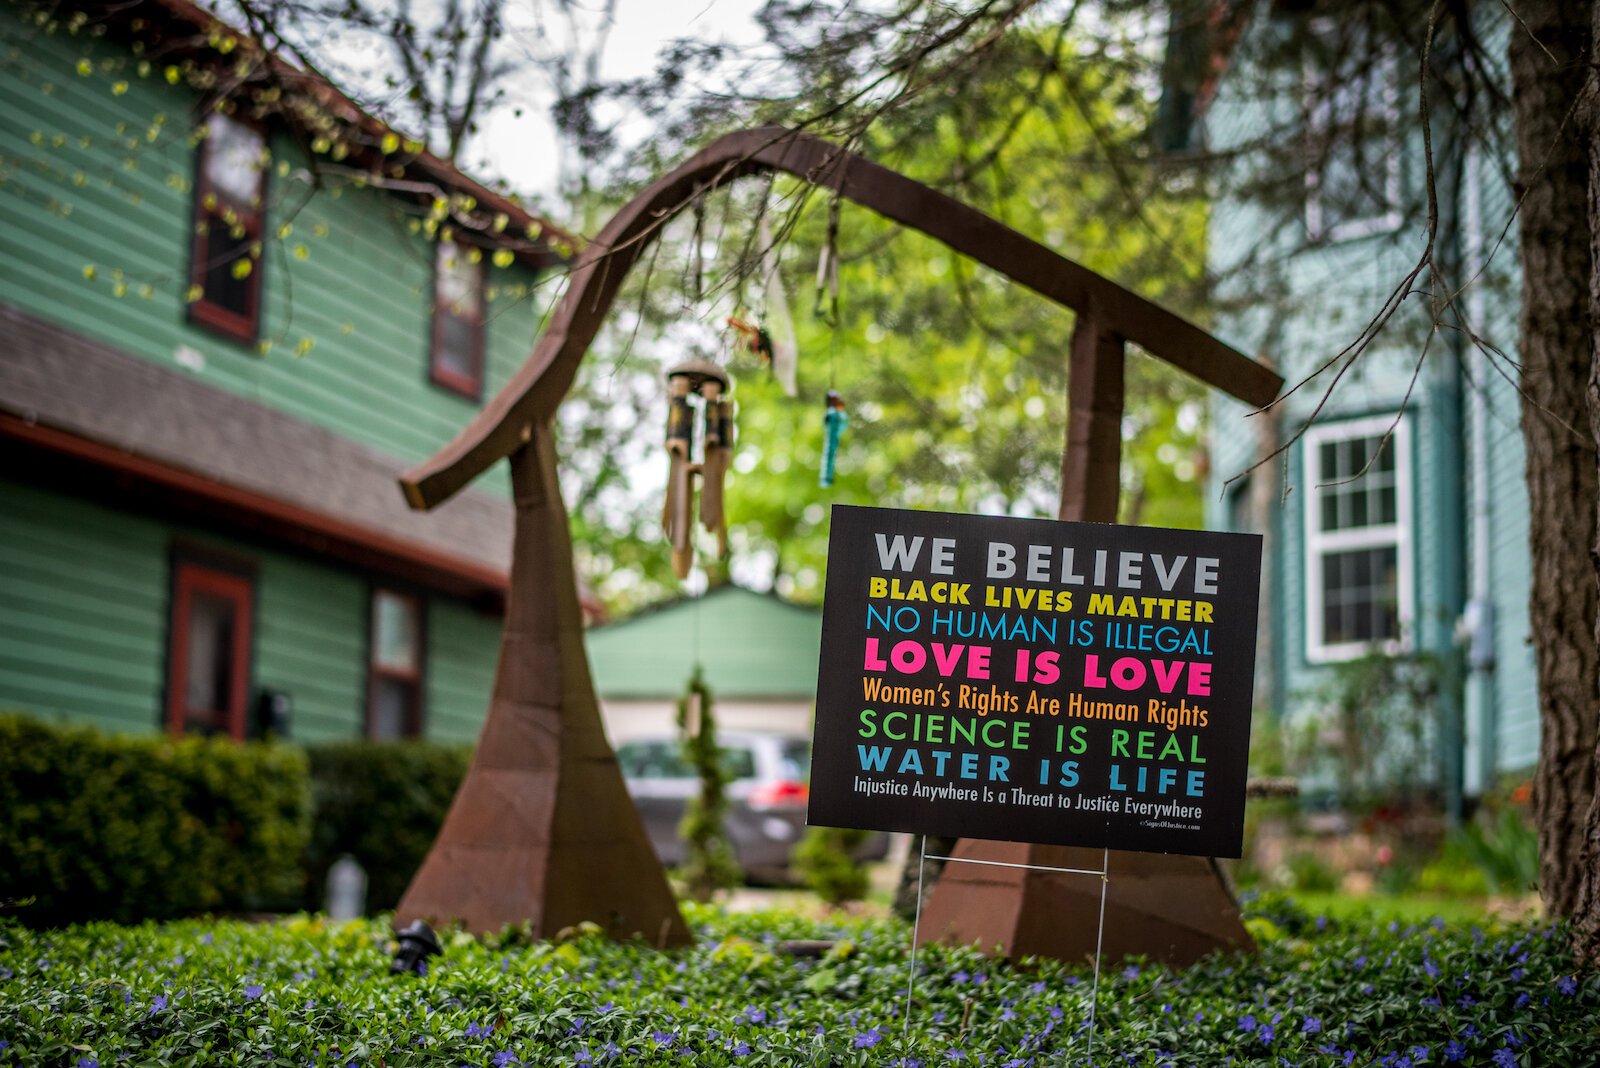 Signs reinforce the idea that respect for others is an important part of the neighborhood.